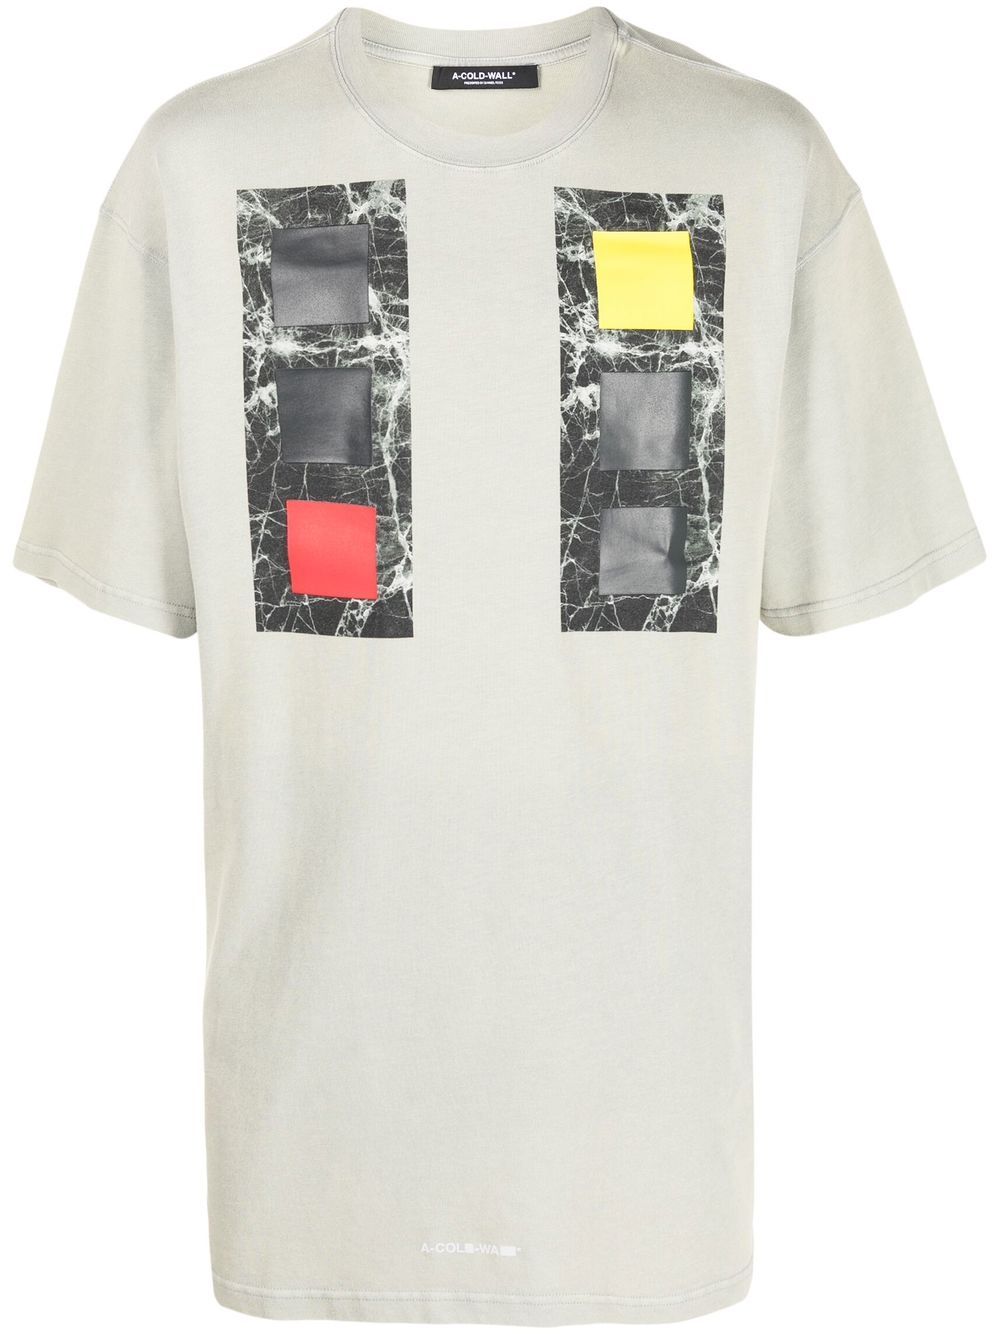 A-COLD-WALL* Cubist T-Shirt - Nude von A-COLD-WALL*